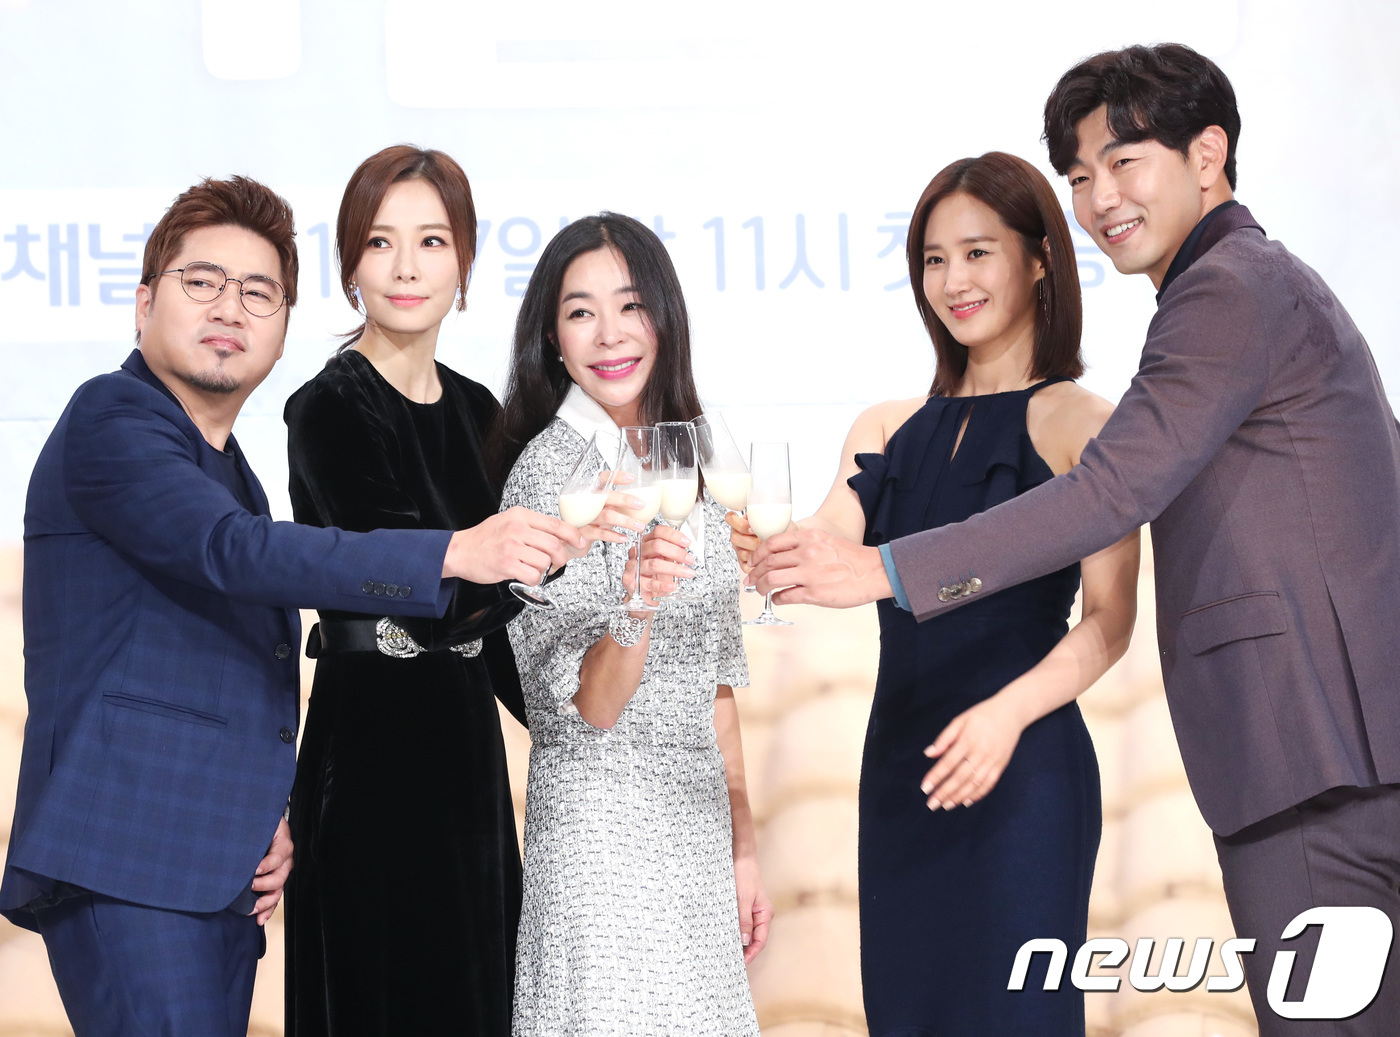 Makgeoli on the Roof is a pure 100% real brewing entertainment program that does not involve the production crew who live with Makgeoli in nature by Actor Lee Hye-Yeong, Lee Jong-hyeok, Son Tae-young and R&B Daddy Johan Kim and Girls Generation Kwon Yuri, who love Makgeoli ...November 7, 2018.